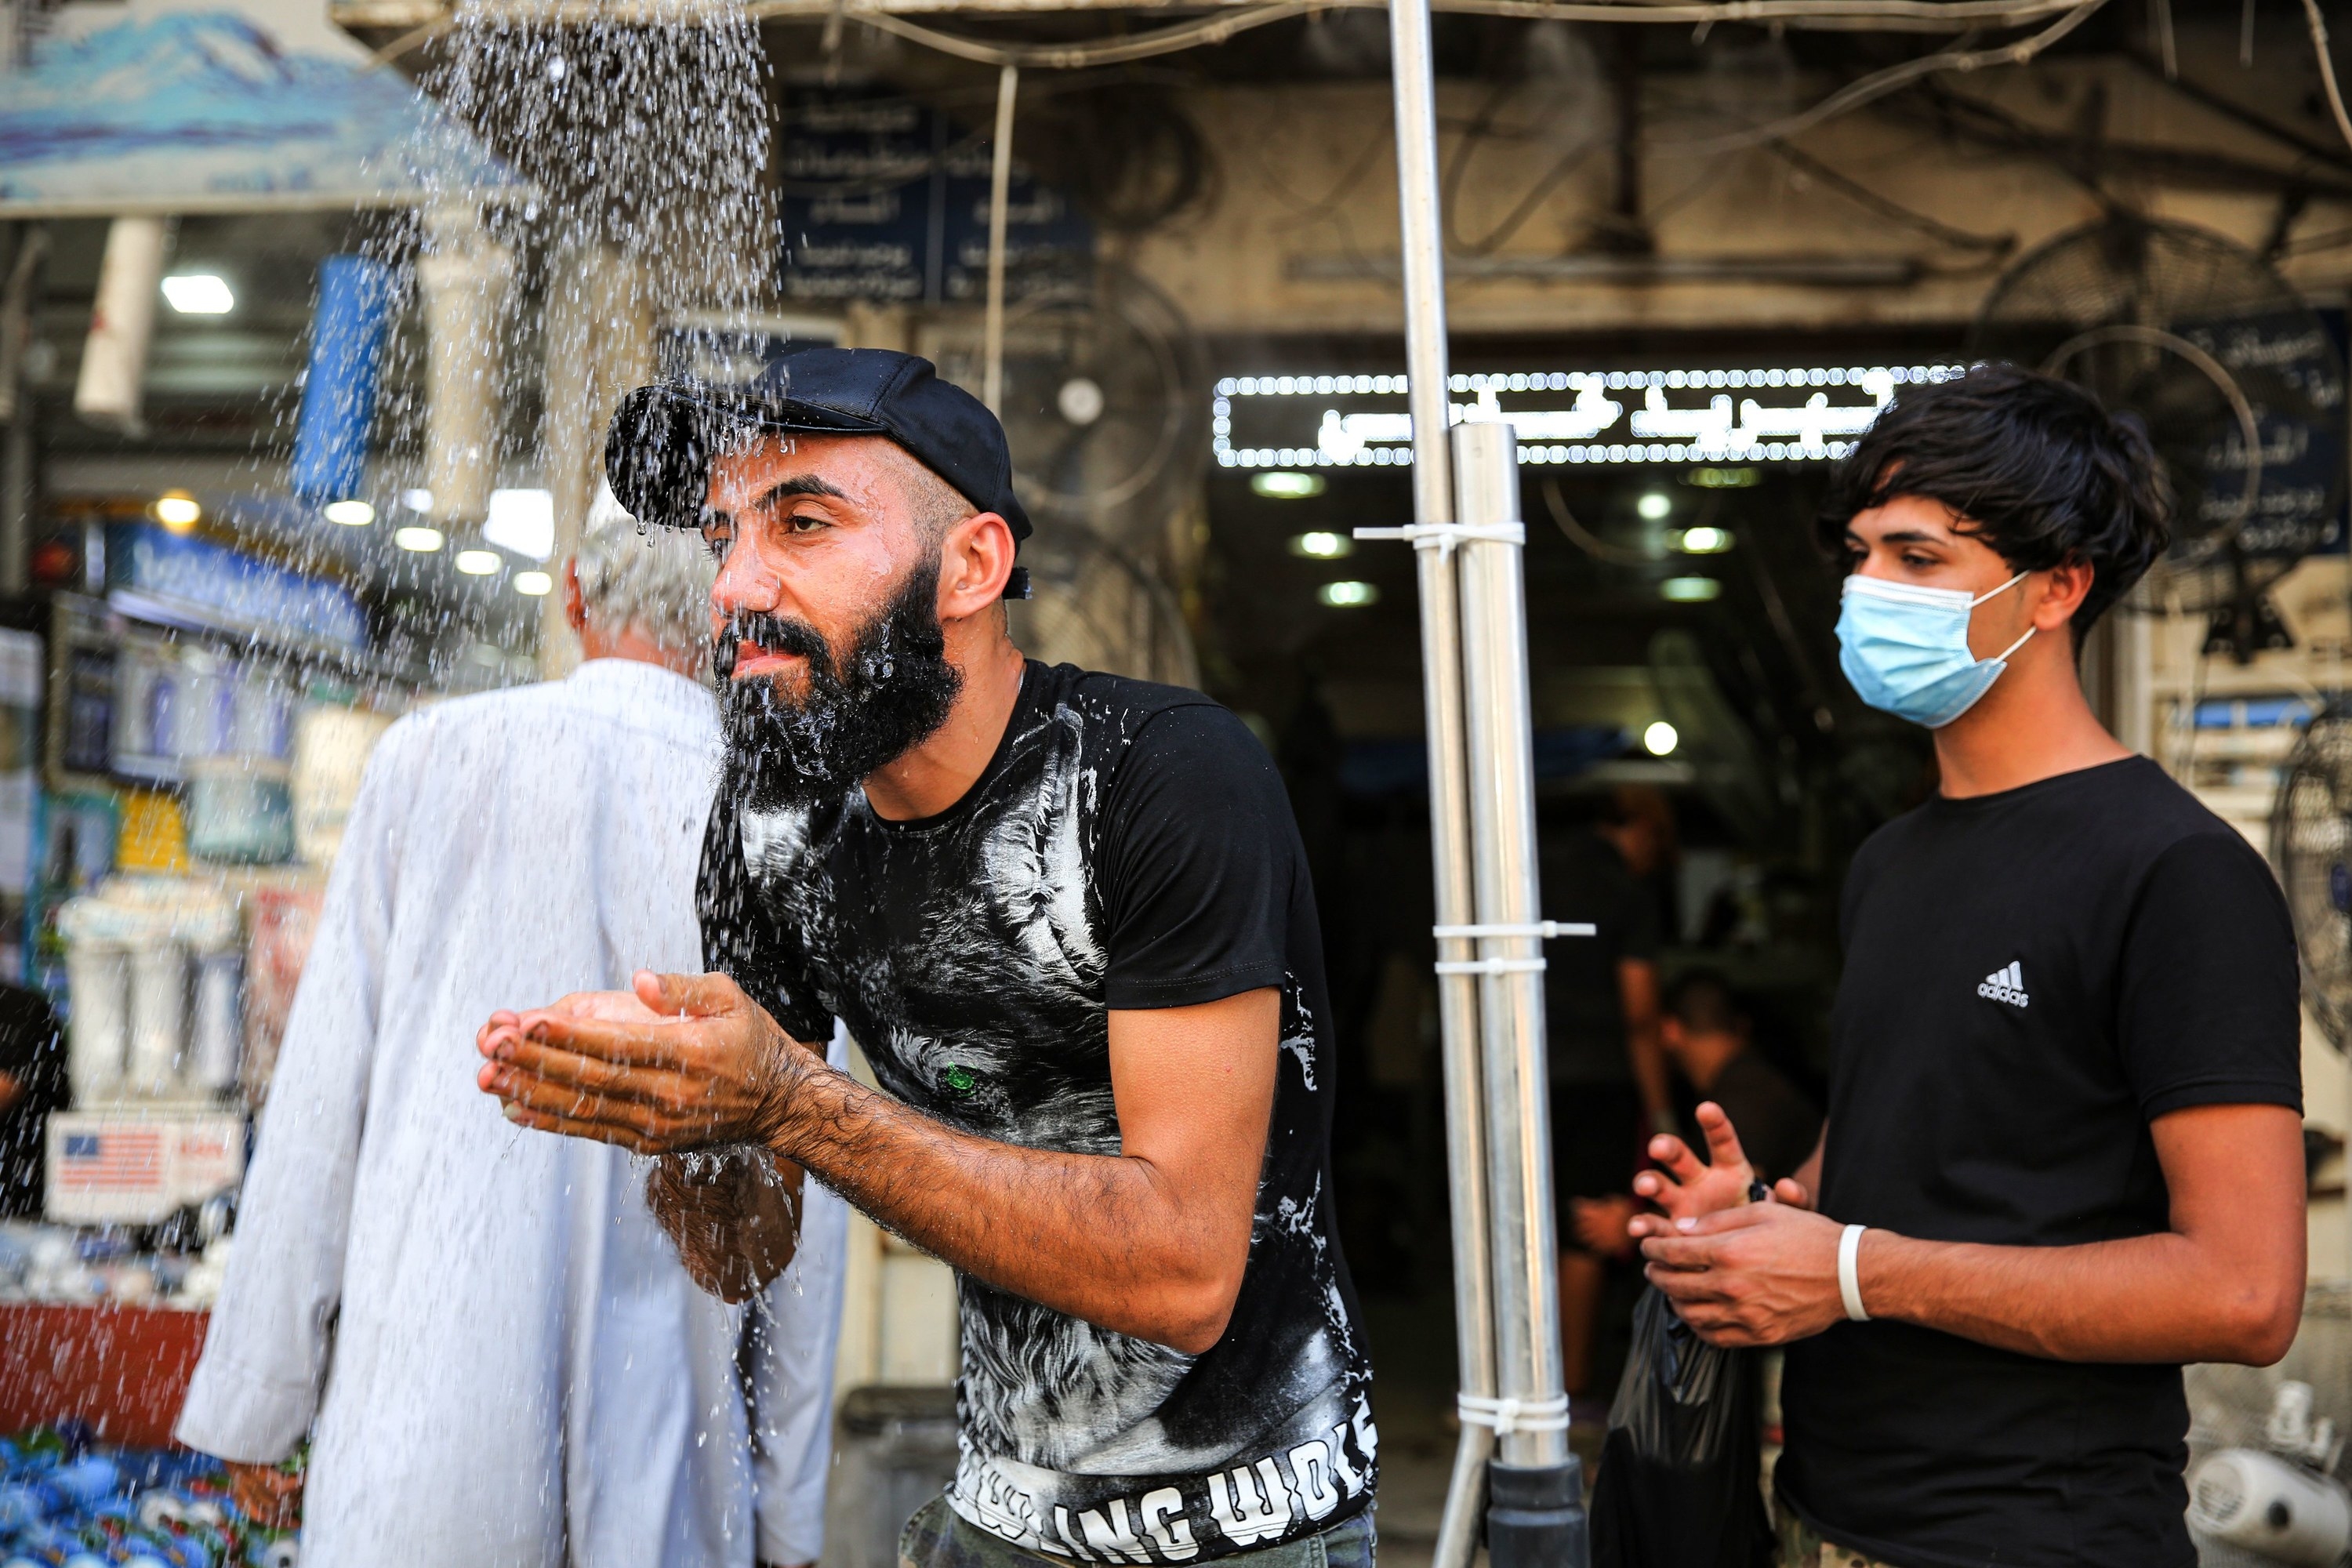 A man cups his hands under a spray of water while a young man wearing a face mask stands behind him